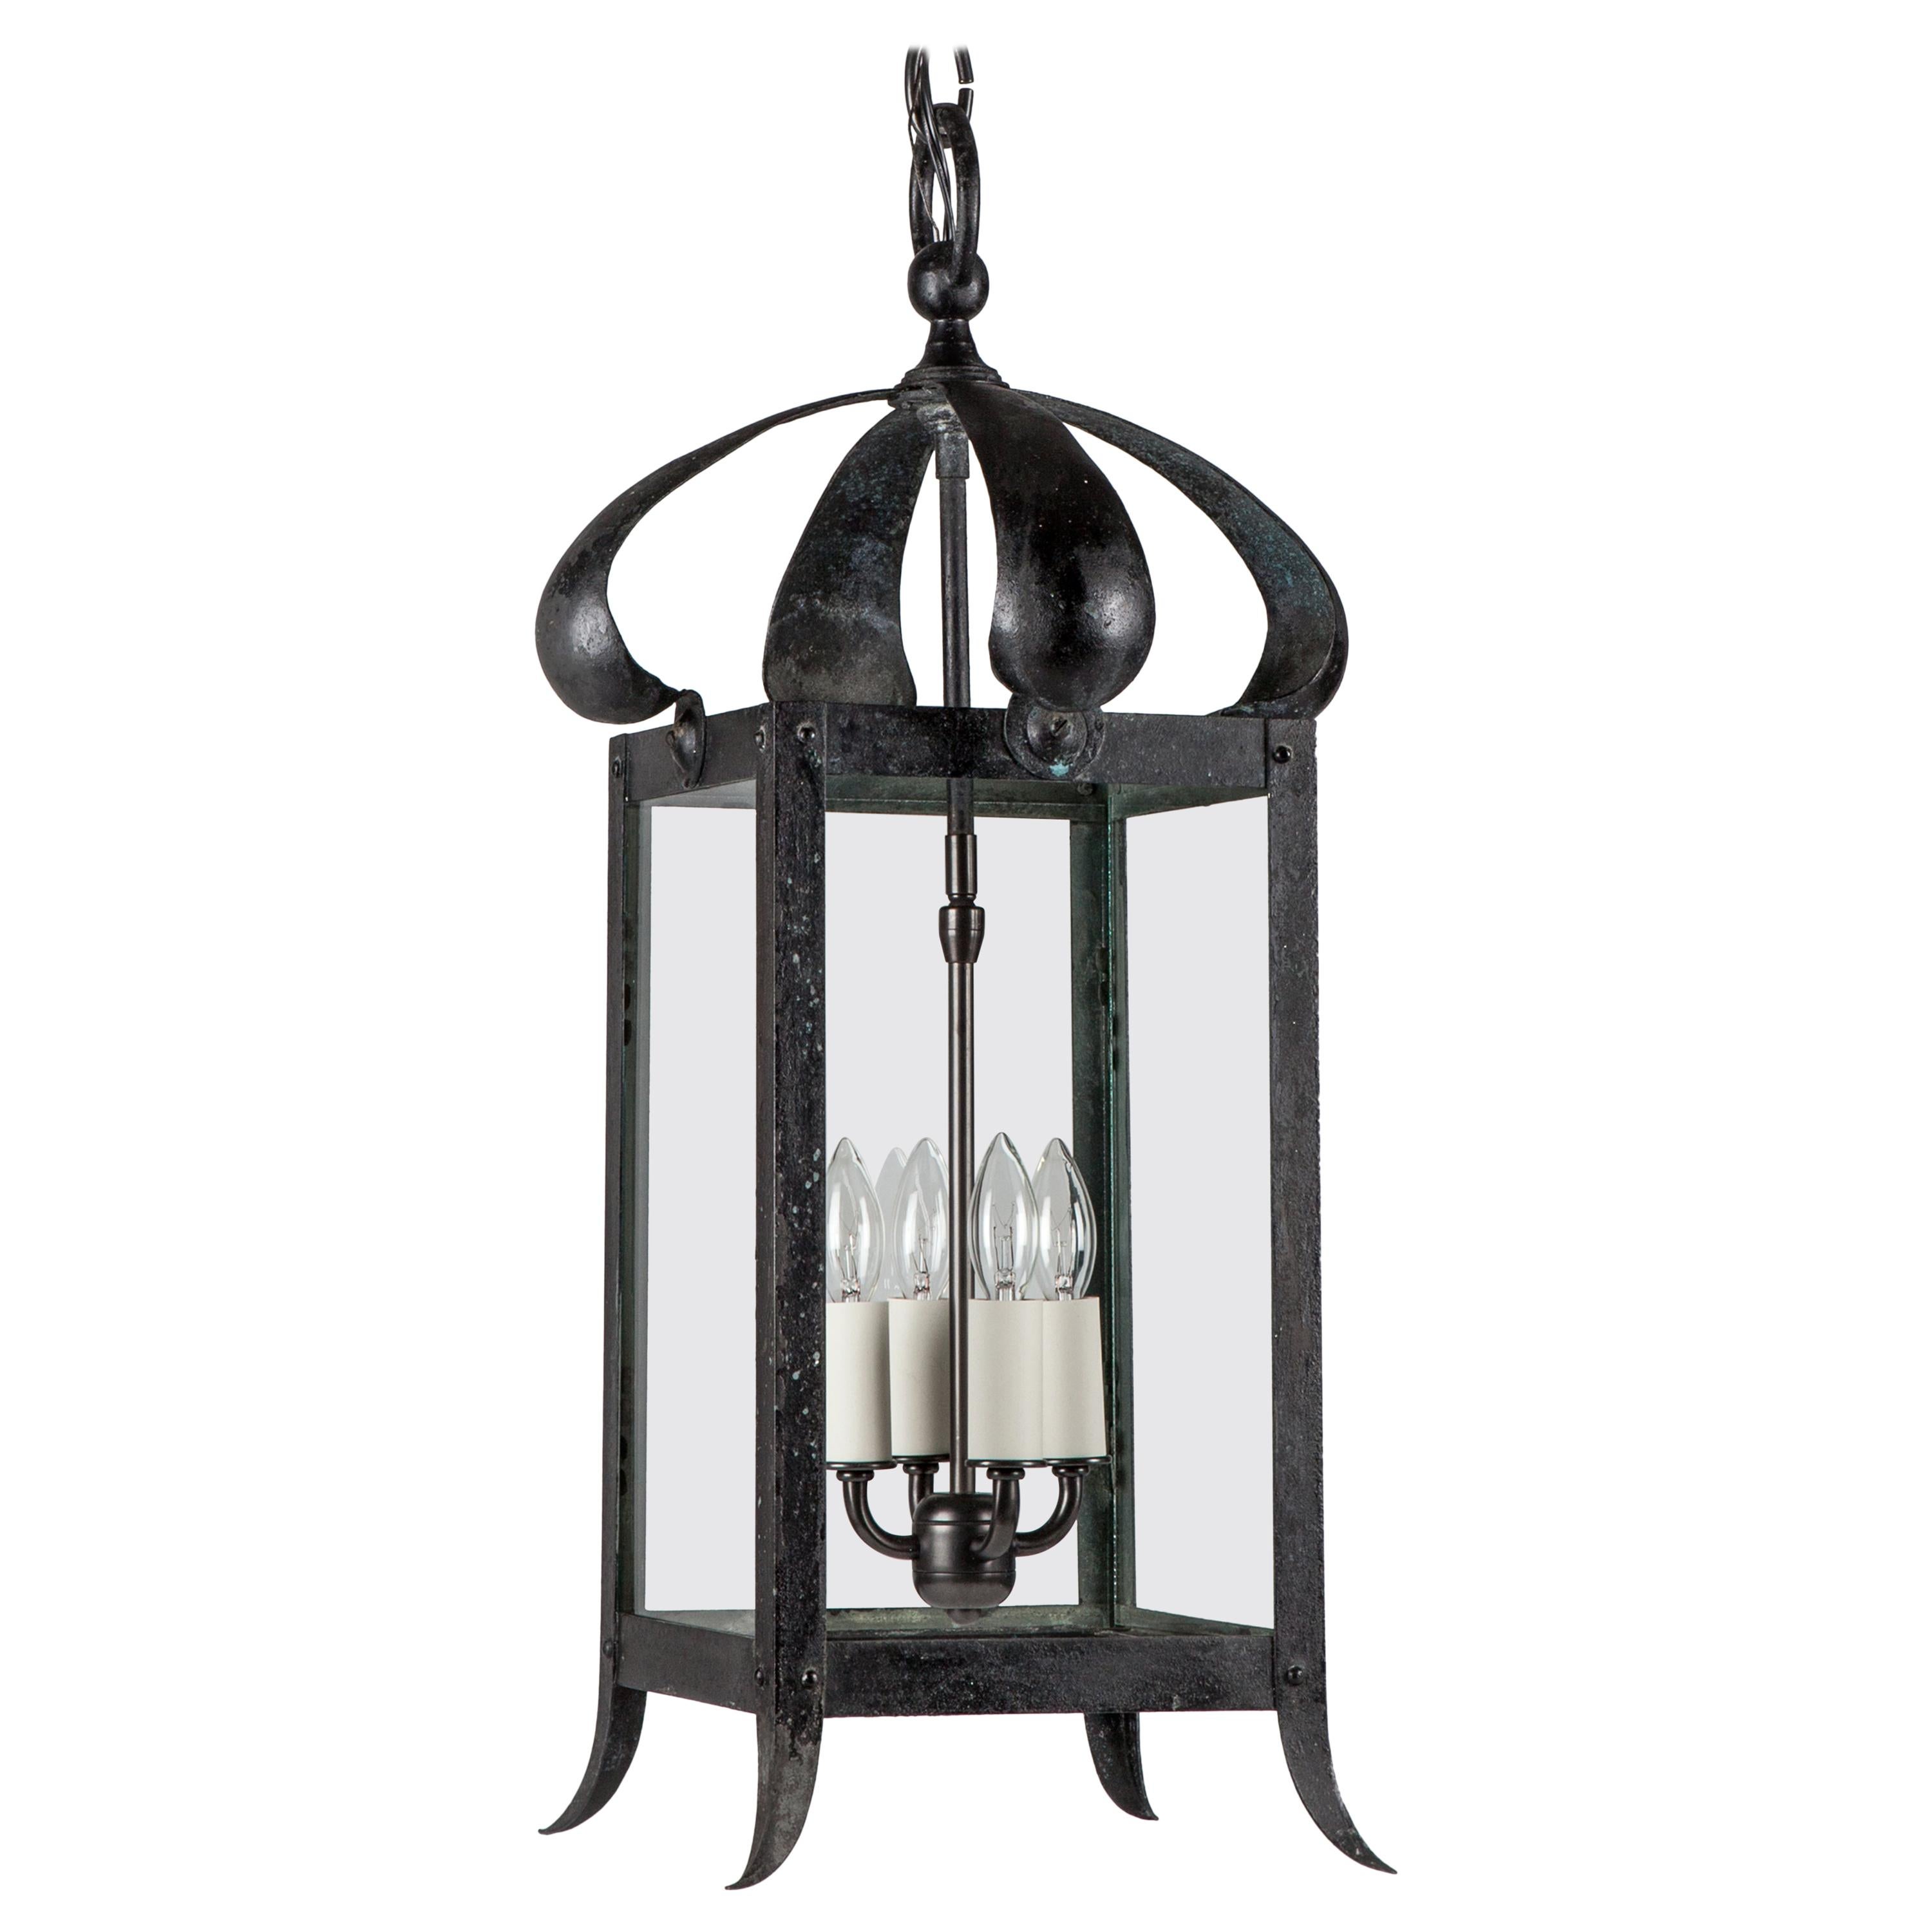 Antique Four Sided Blackened Wrought Brass Lantern with Clear Glass, Circa 1910s For Sale